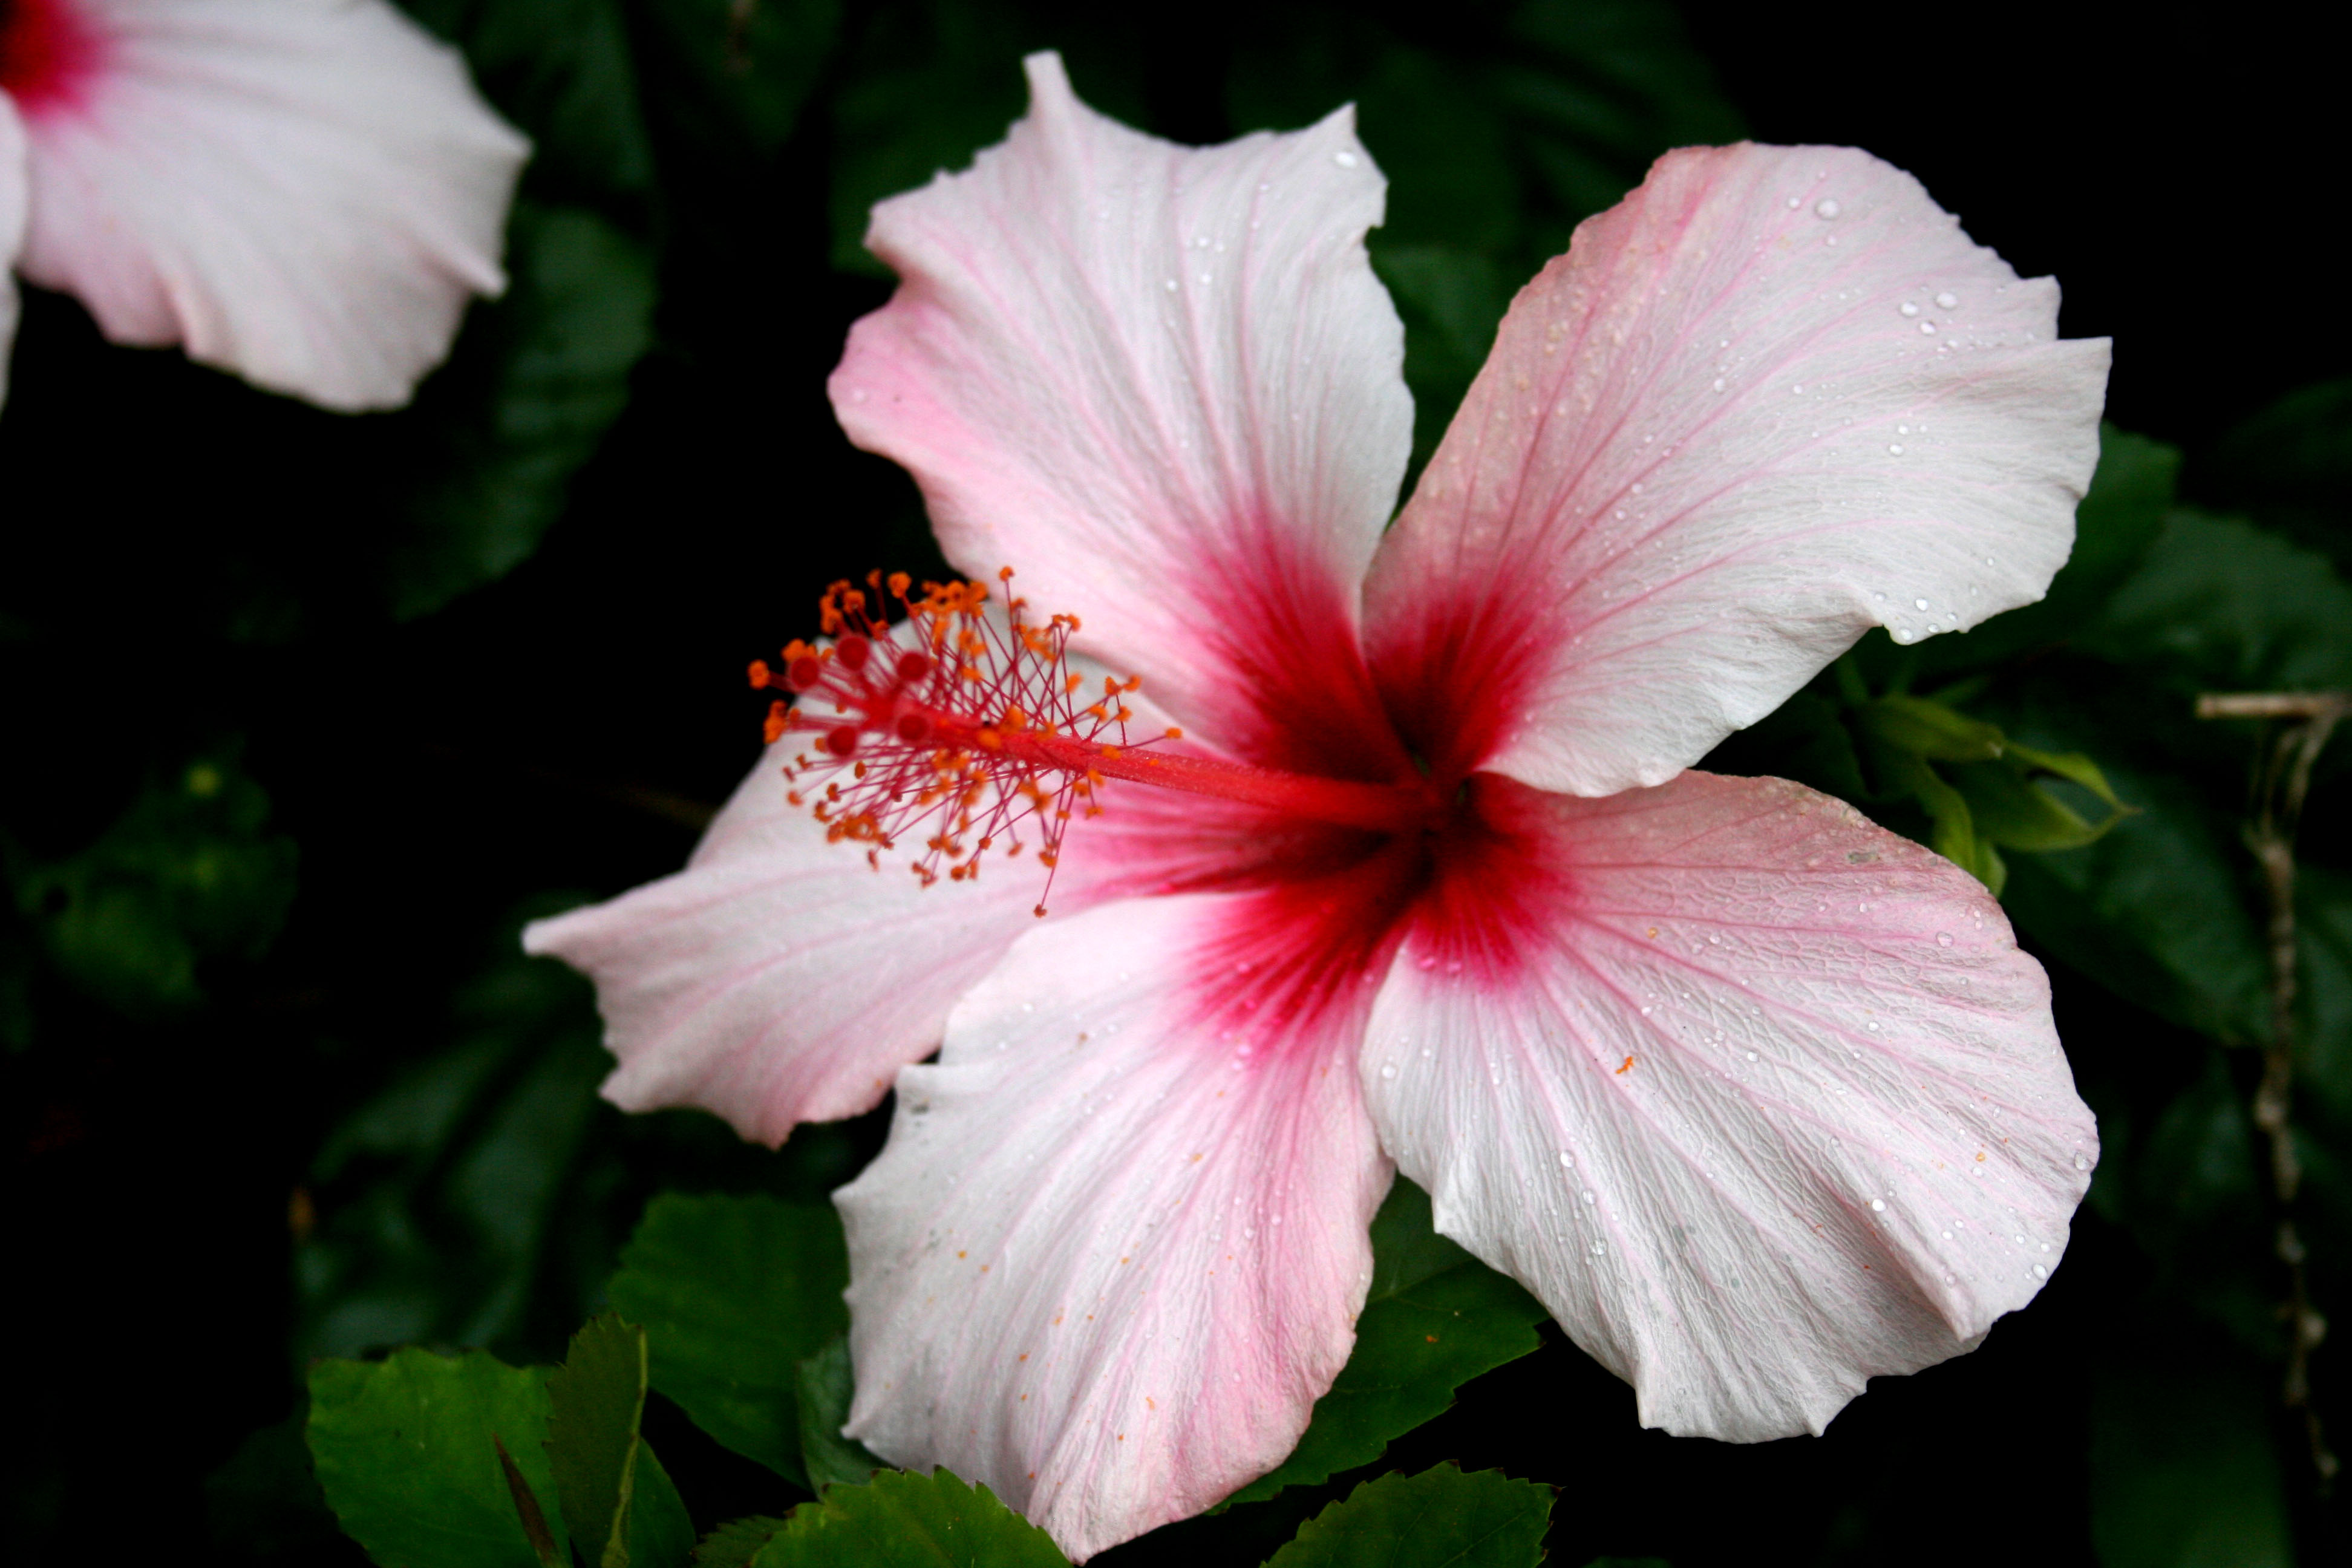 Earth Flower Hibiscus Close Up Pink Flower 3888x2592